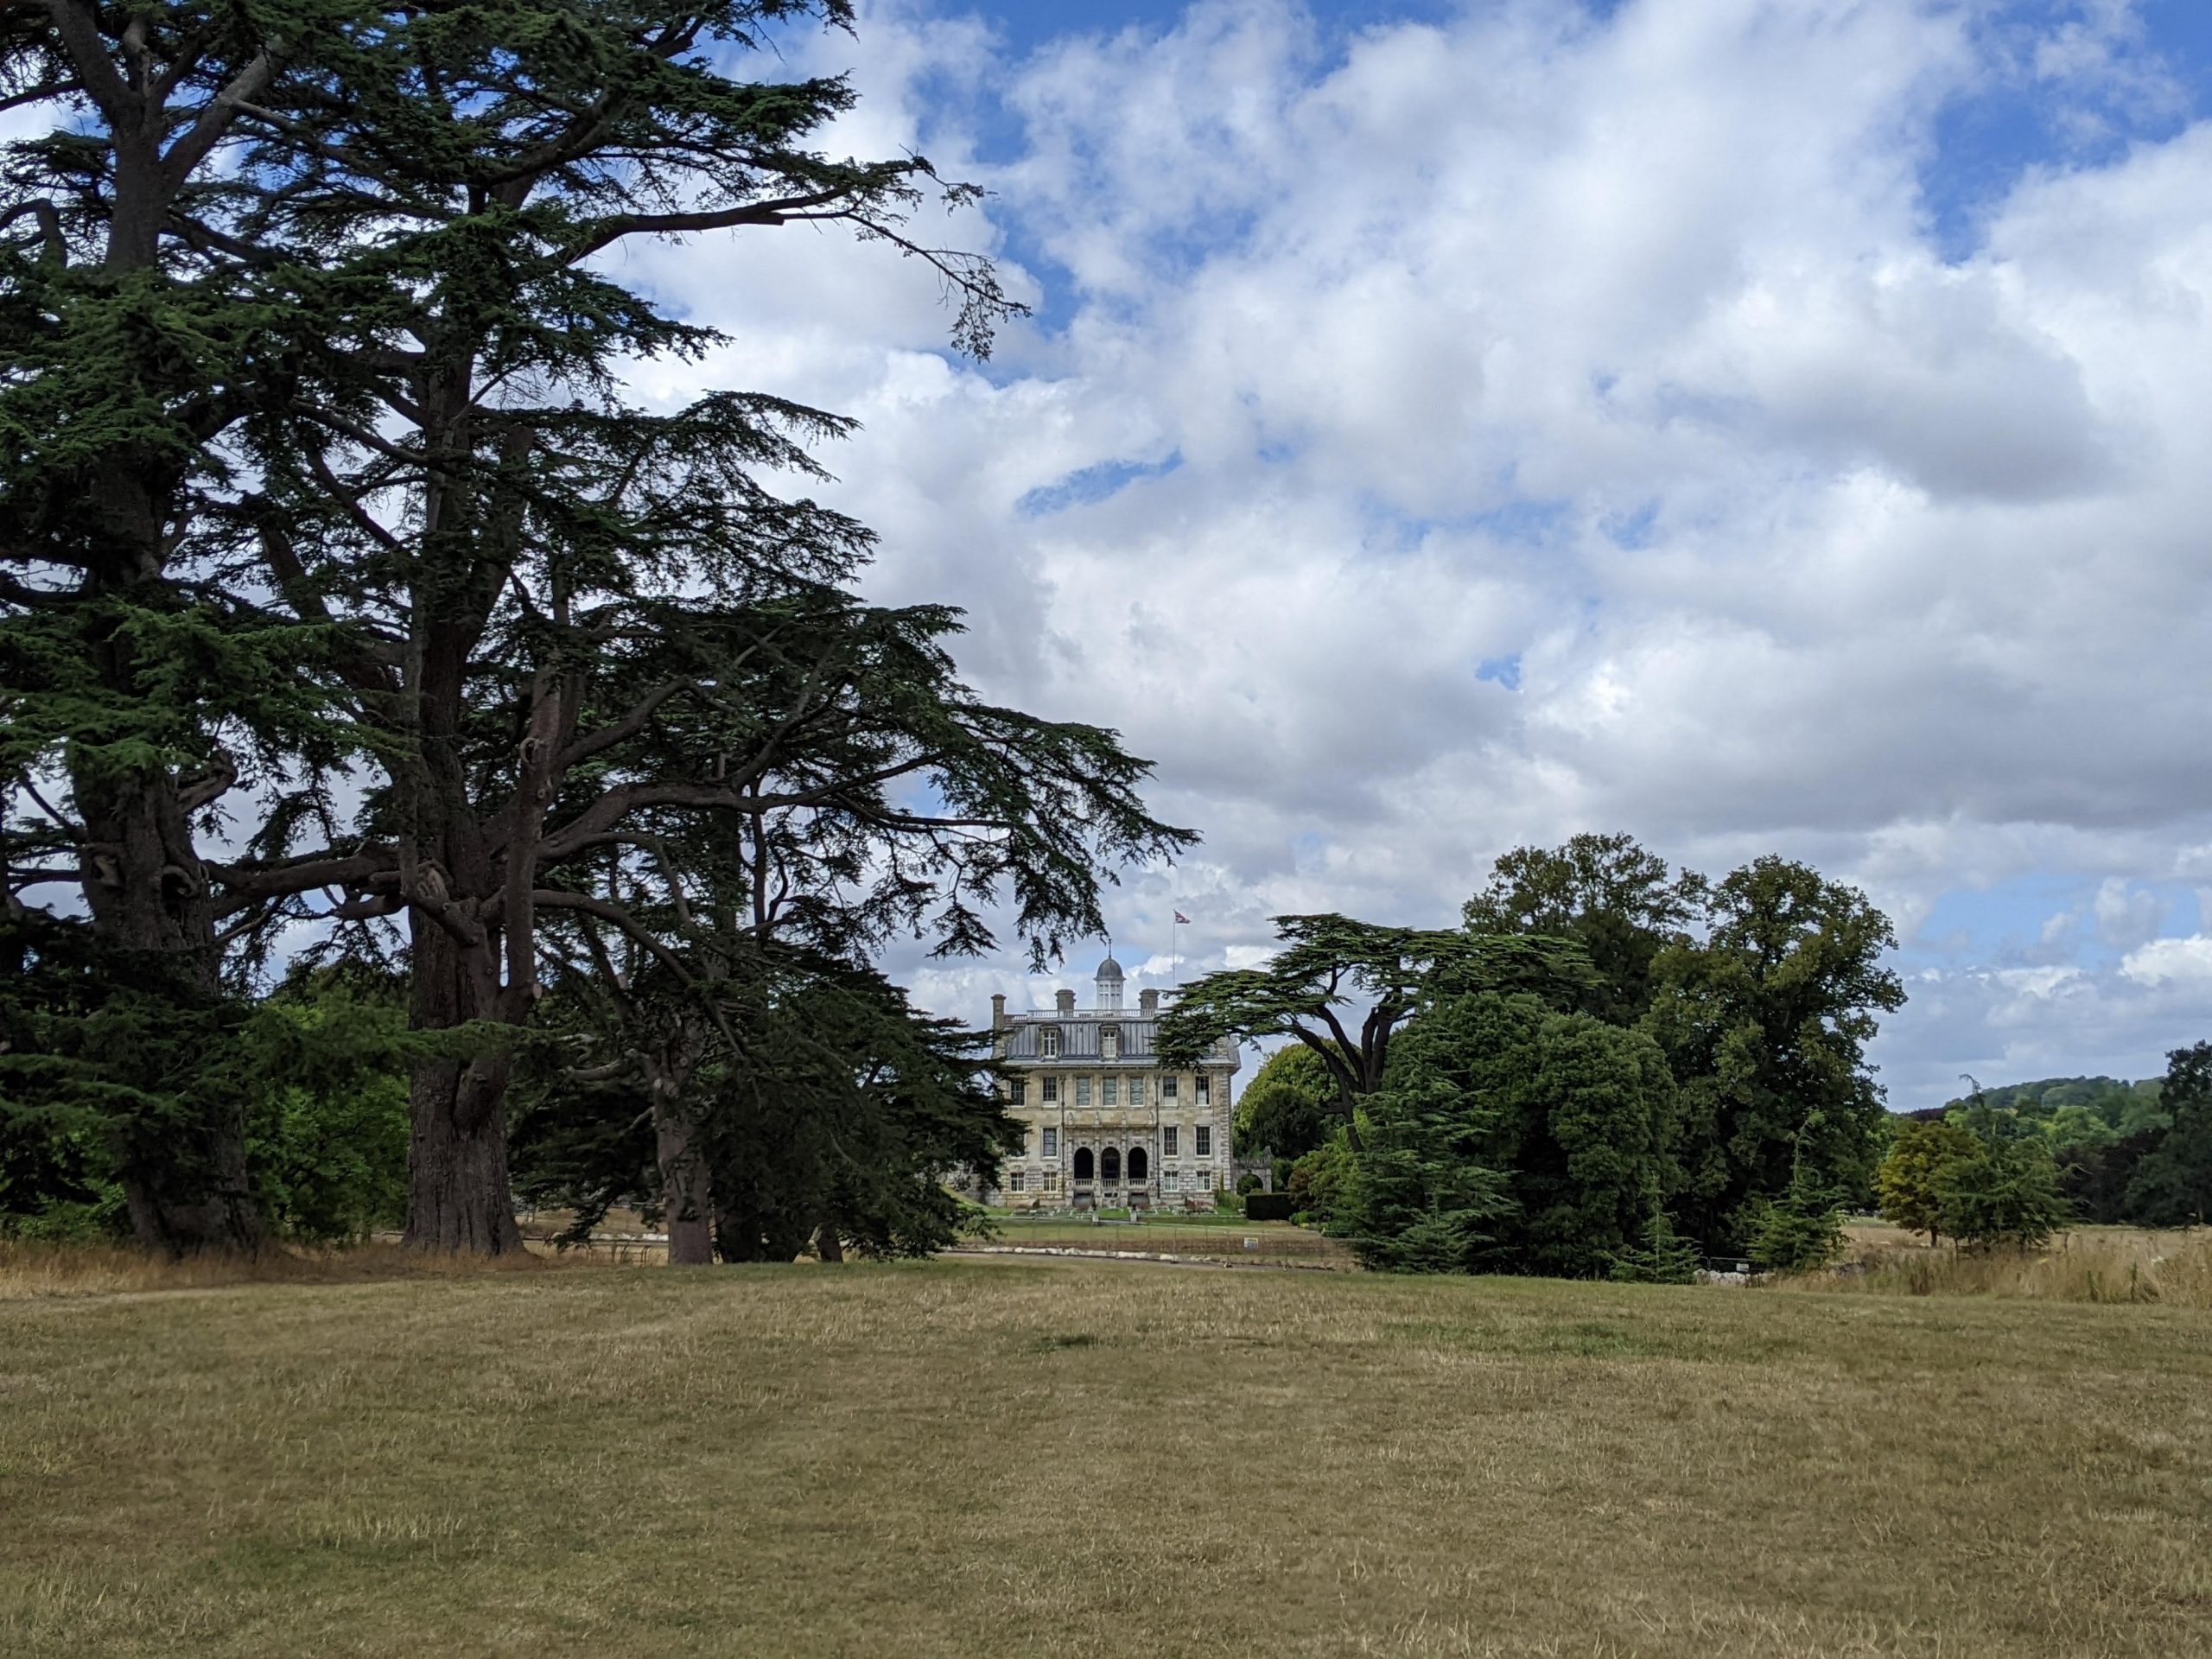 A stately home at the bottom of a long lawn bordered by trees